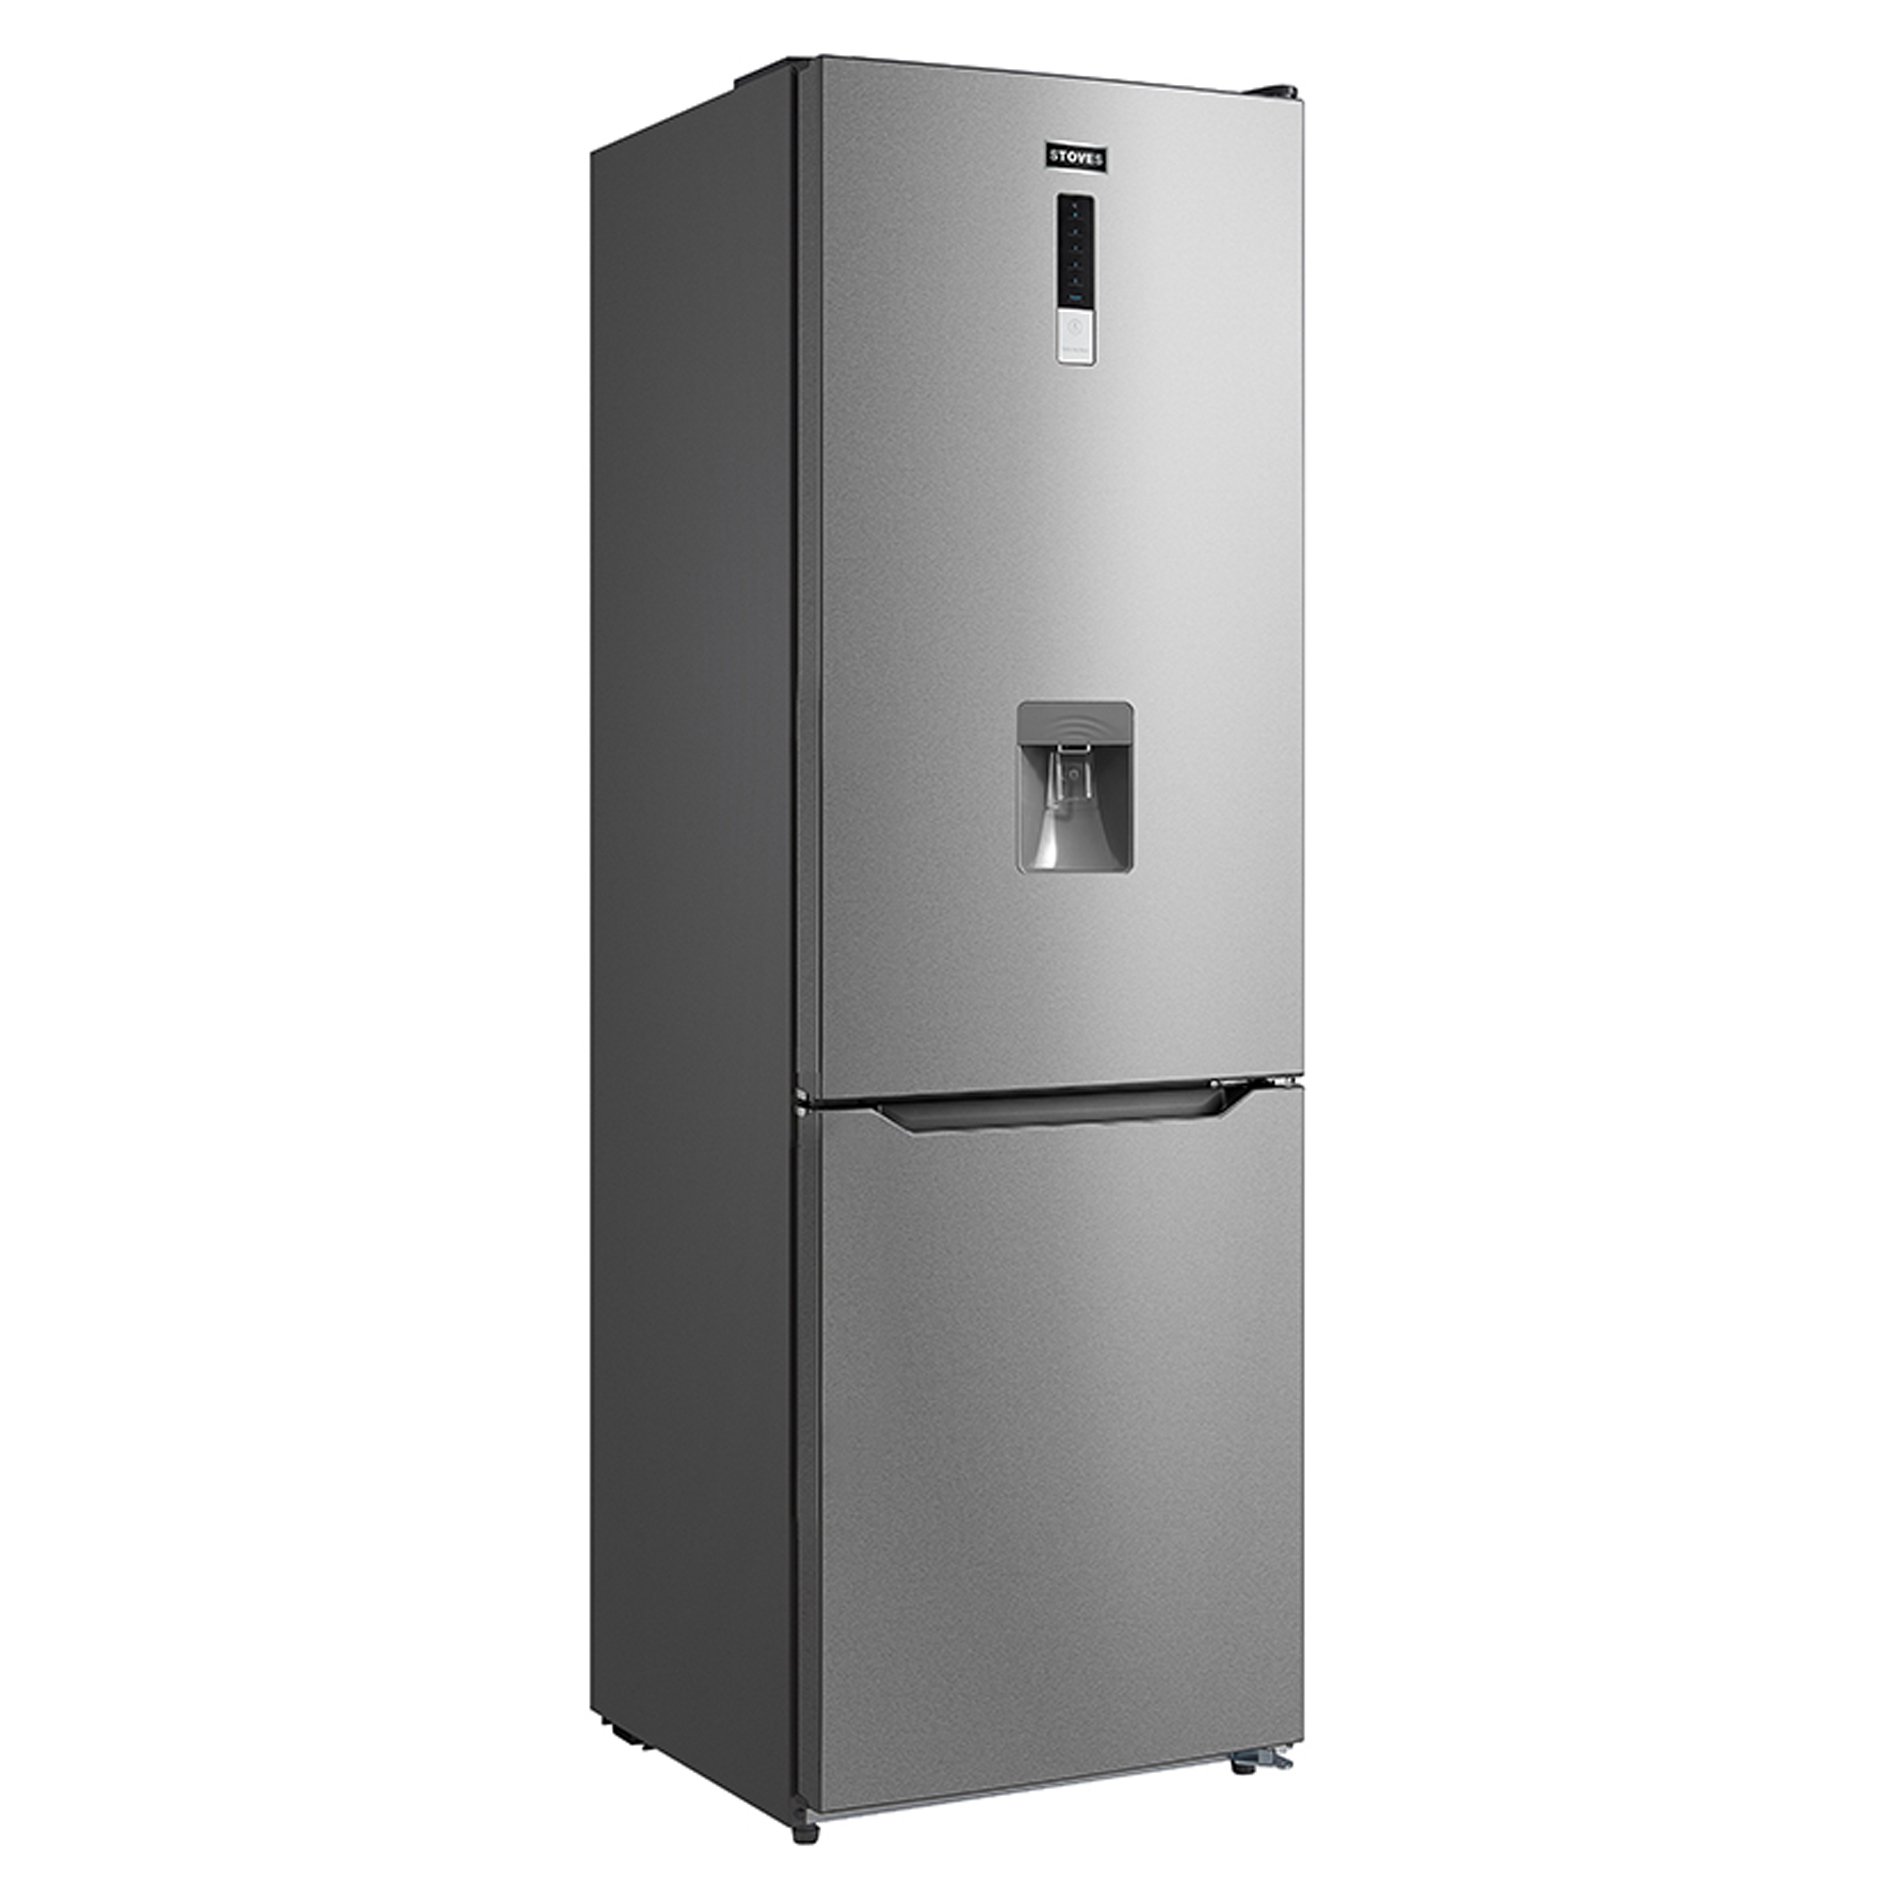 60cm total no frost fridge freezer, with gross 224L fridge & 84L freezer capacity. Features non-plumbed through the door, total no frost, manual thermostat and reversible doors. 